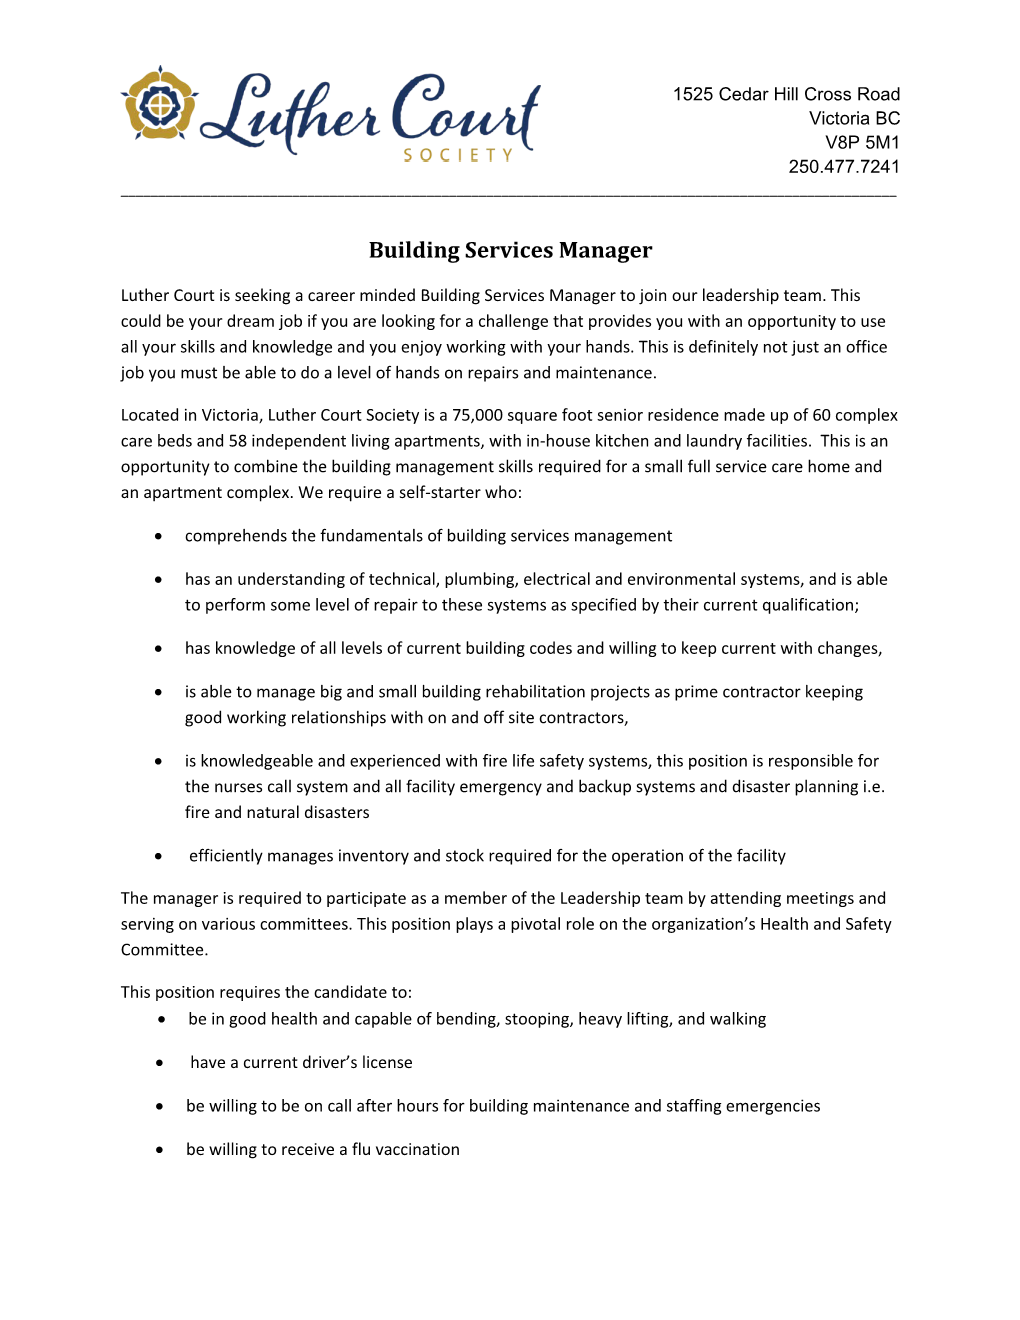 Building Services Manager